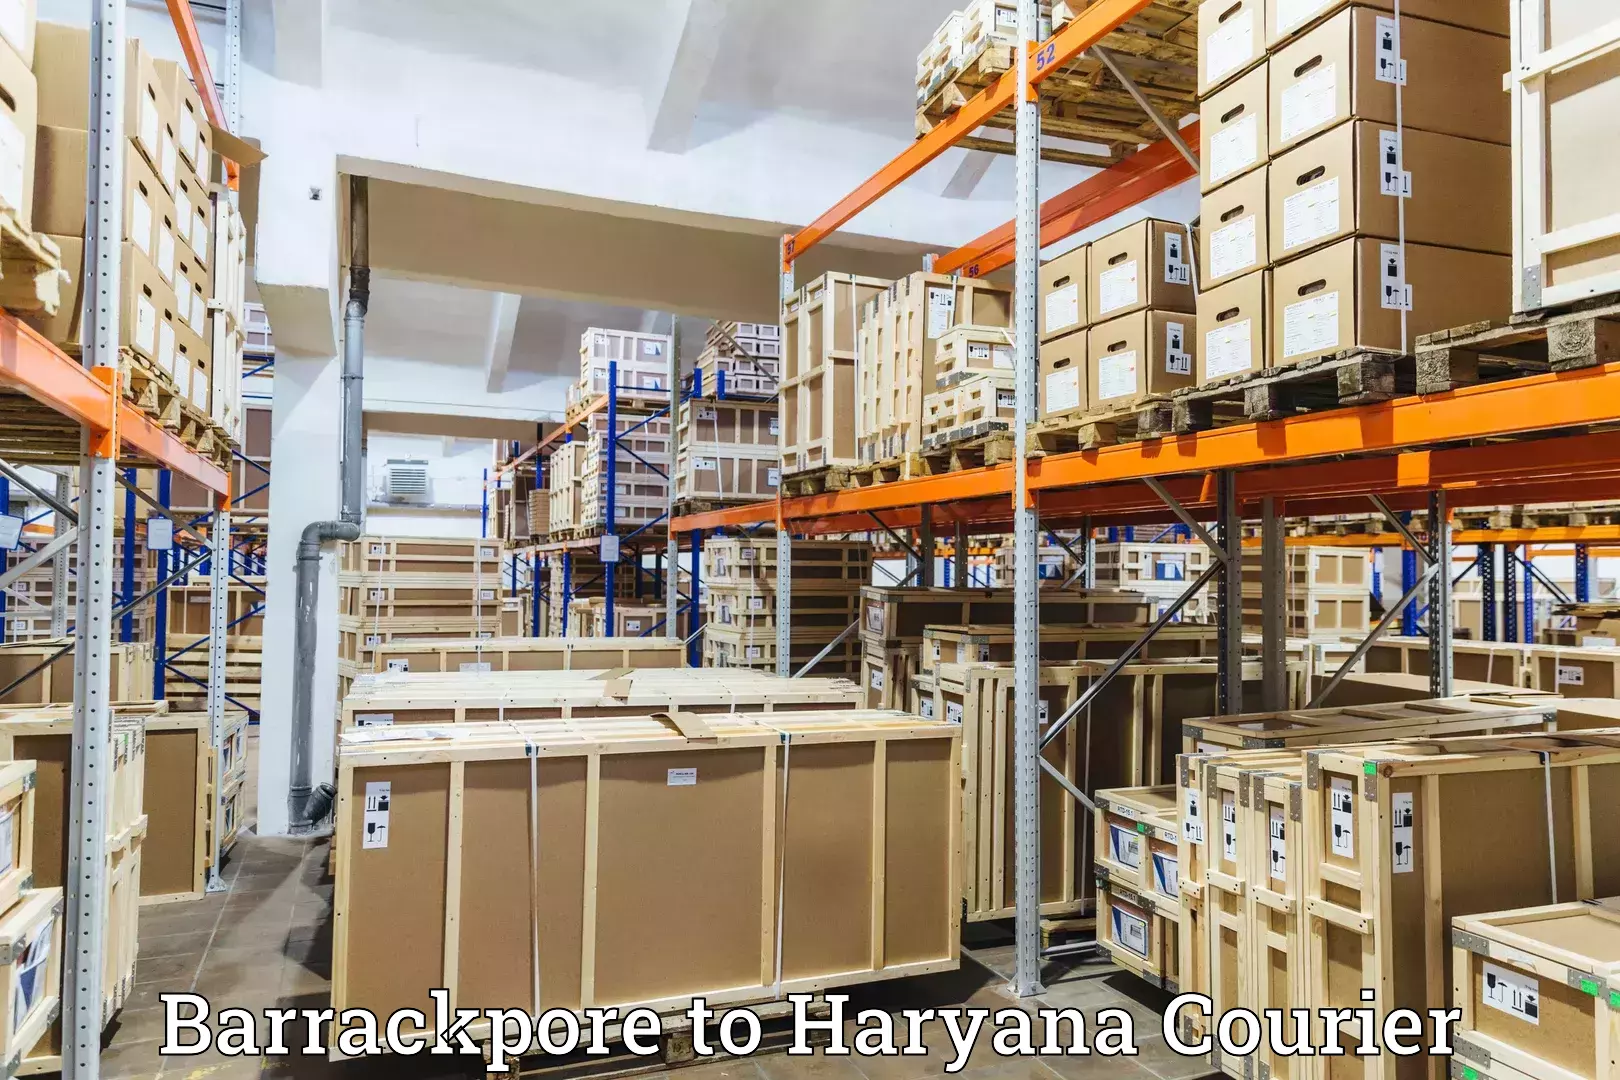 Efficient order fulfillment Barrackpore to Siwani